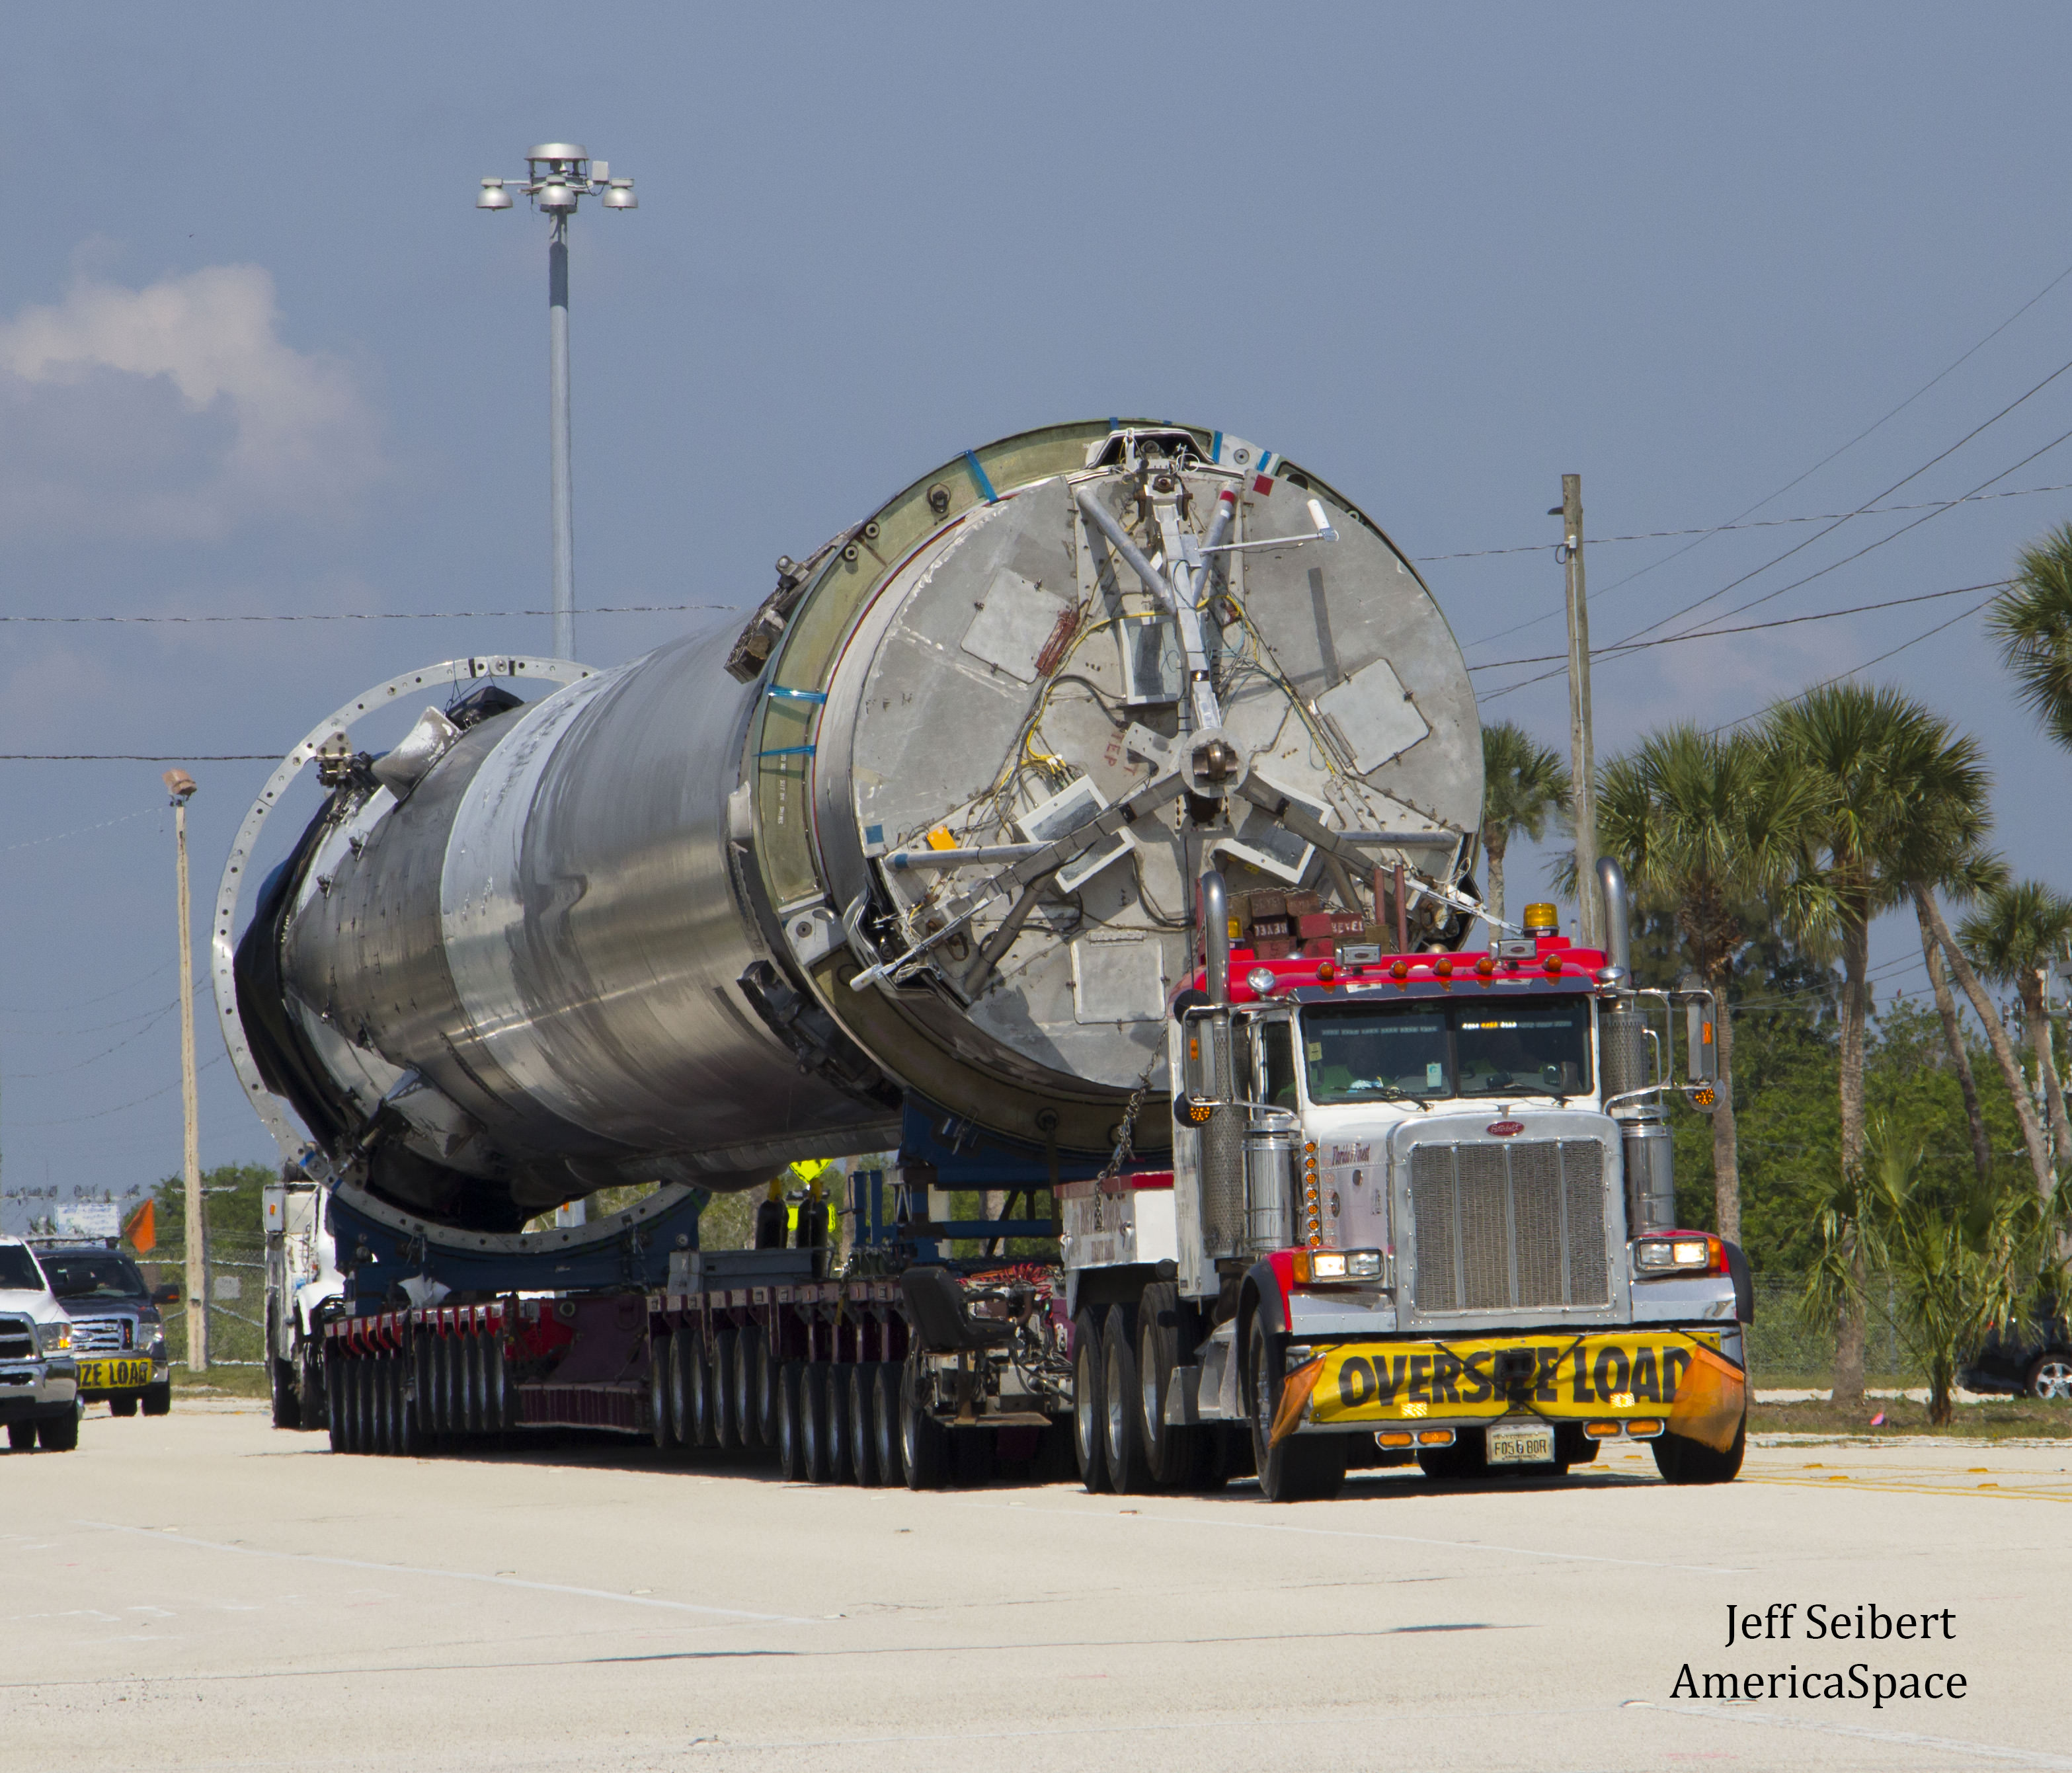 First stage booster from SpaceX JCSAT-14 launch was transported horizontally to SpaceX hangar at pad 39A at the Kennedy Space Center, Florida on May 16, 2016. Credit: Jeff Seibert/AmericaSpace